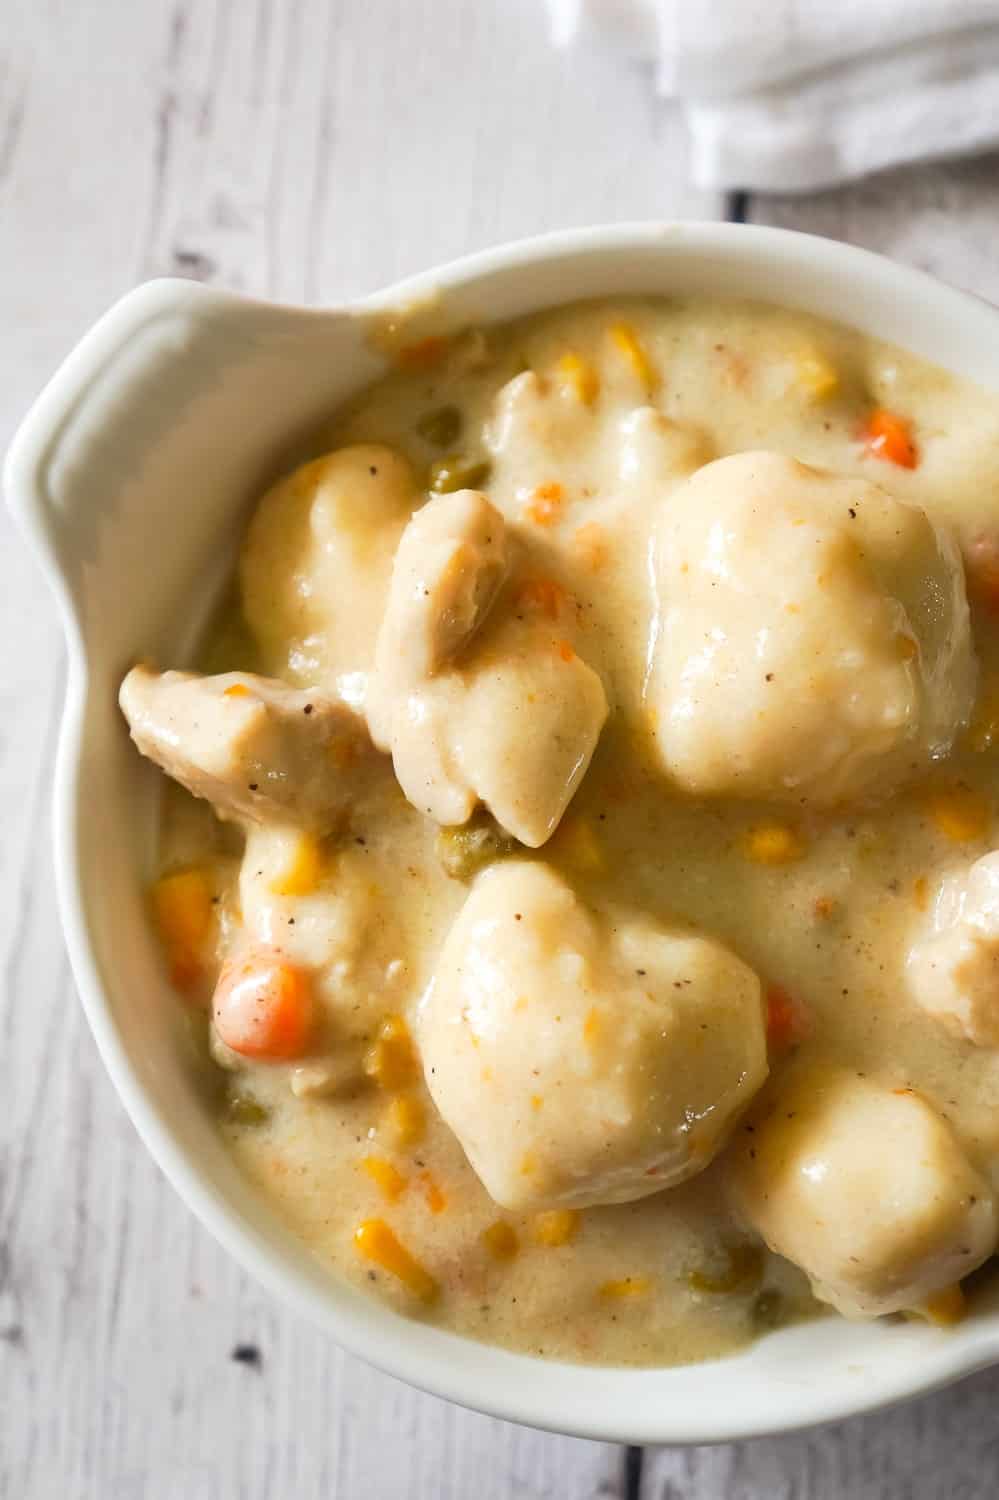 Chicken and Dumplings with Bisquick is a hearty comfort food dish loaded with pieces of chicken, carrots, peas, corn and dumplings made from Bisquick.